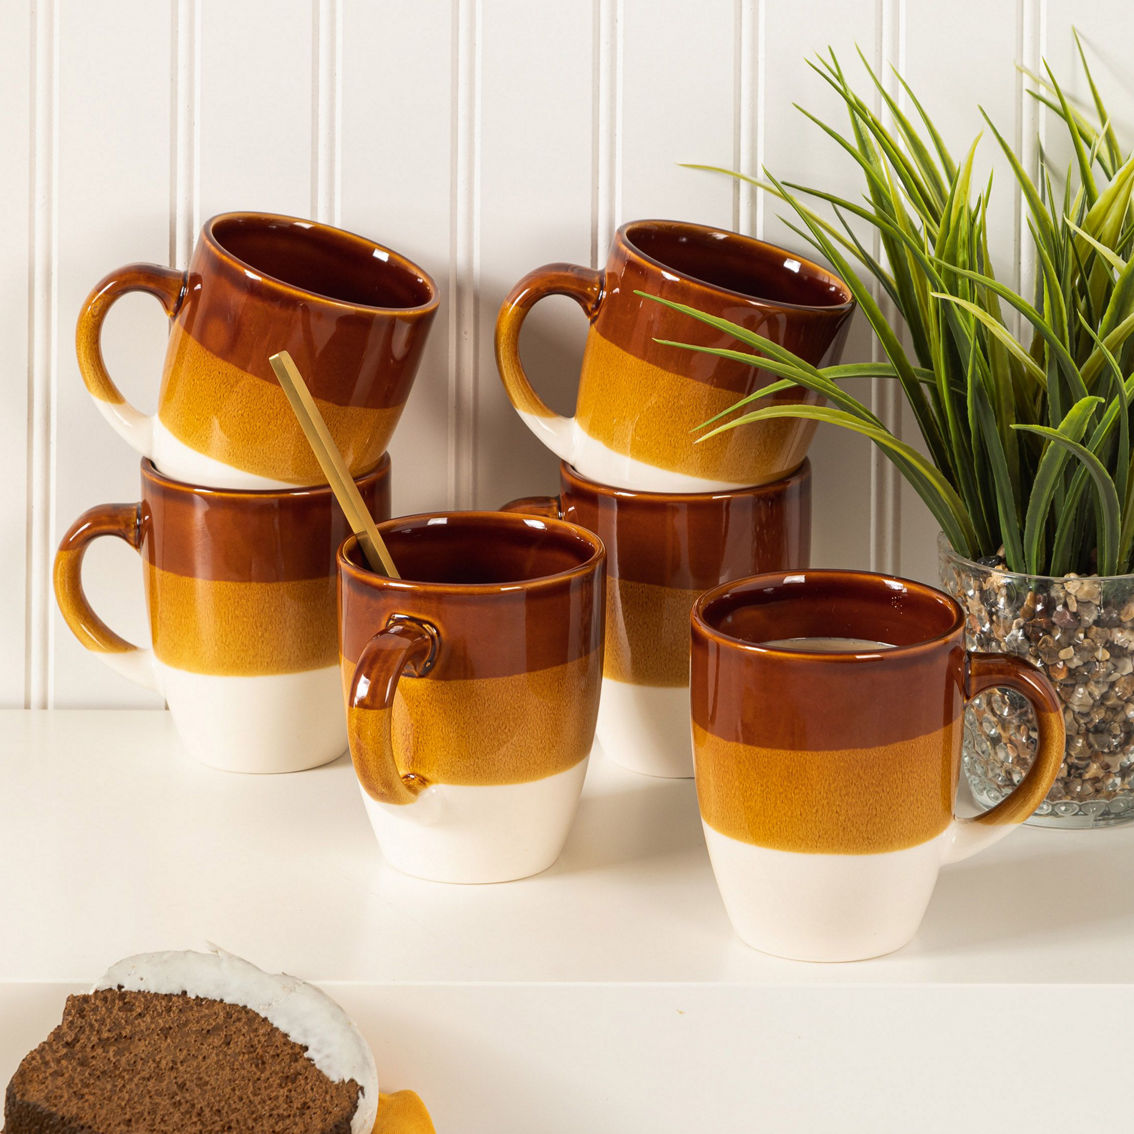 Gibson Home Yellowstone 6 Piece 12 Ounce Stoneware Mug Set in Brown and White - Image 5 of 5